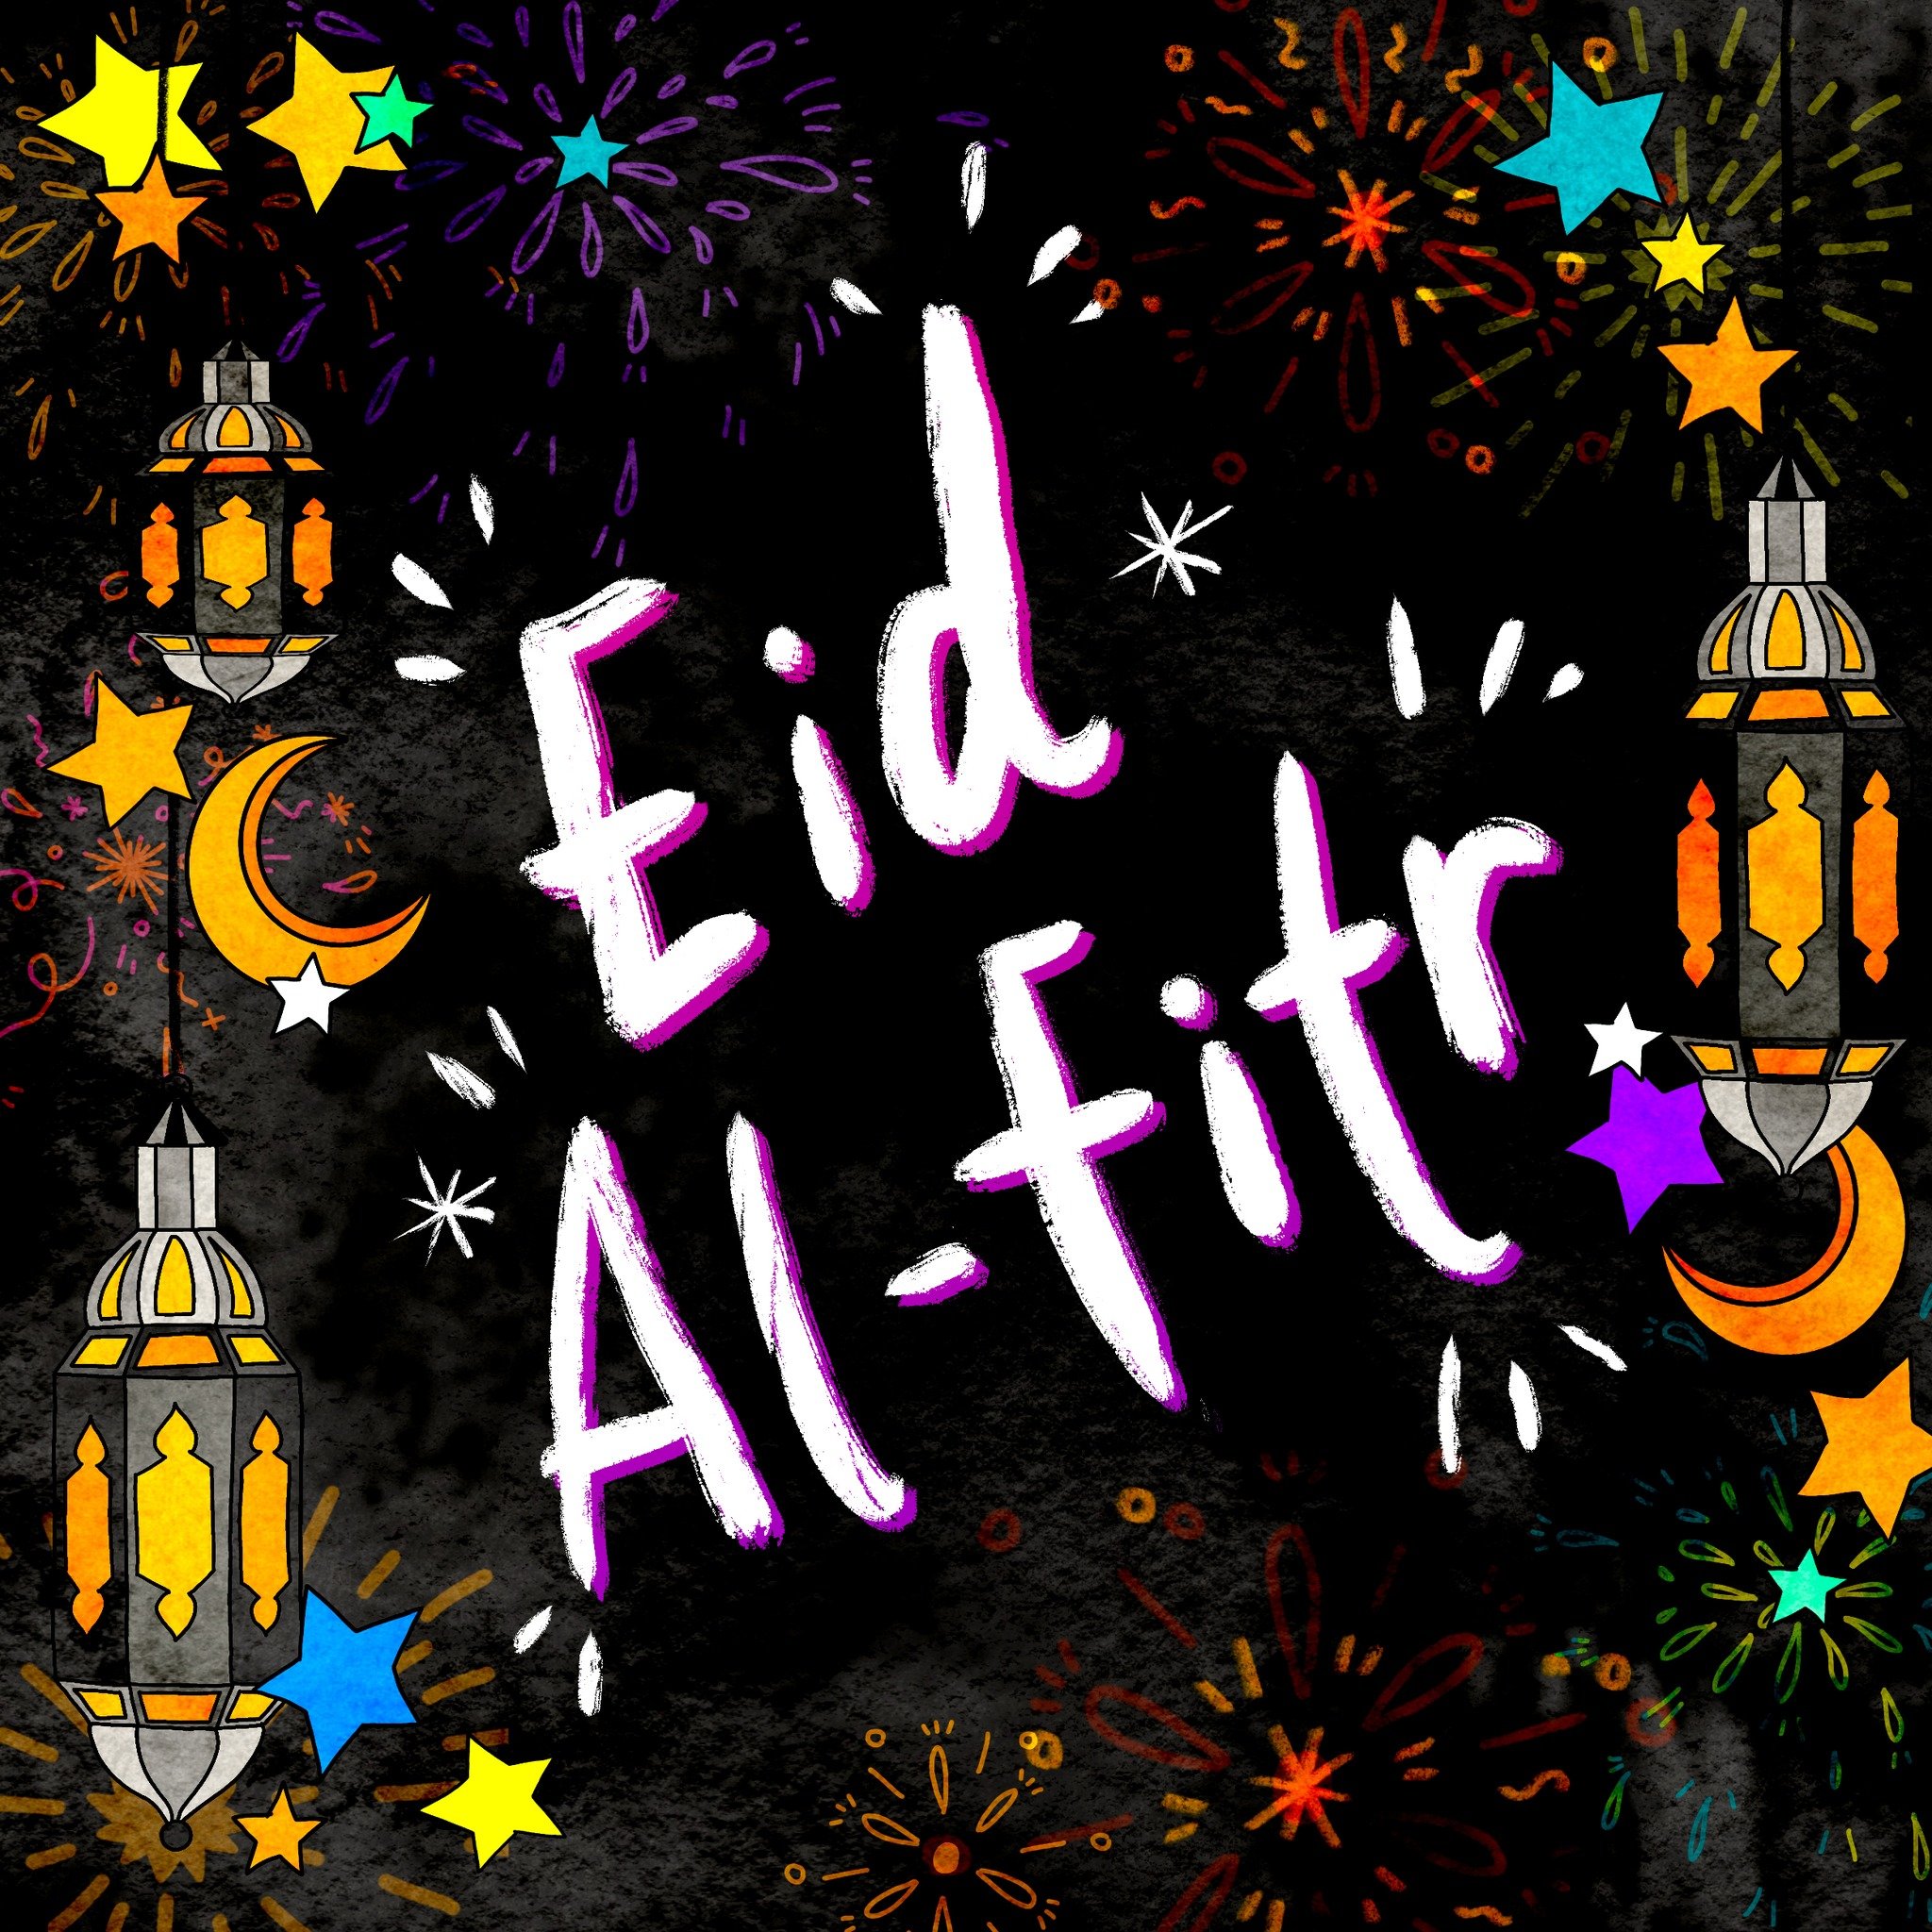 Eid Mubarak to all those who observe, from all of us at the Asian American Advocacy Fund!

Today marks the end of Ramadan after a month of fasting, prayer, and self-reflection. We hope you have a safe and blessed day with your family and loved ones.
